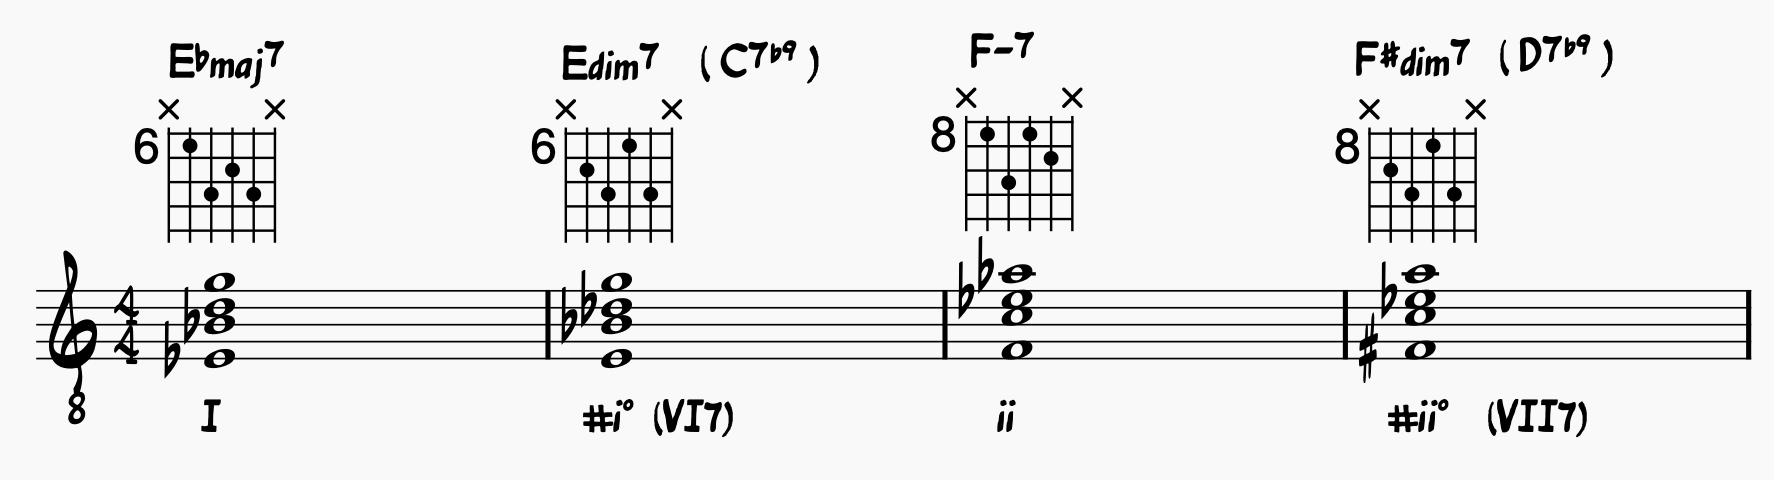 "It Could Happen To You" with diminished chord substitution (I chord, #i° chord, ii chord, #ii° chord) with guitar chords